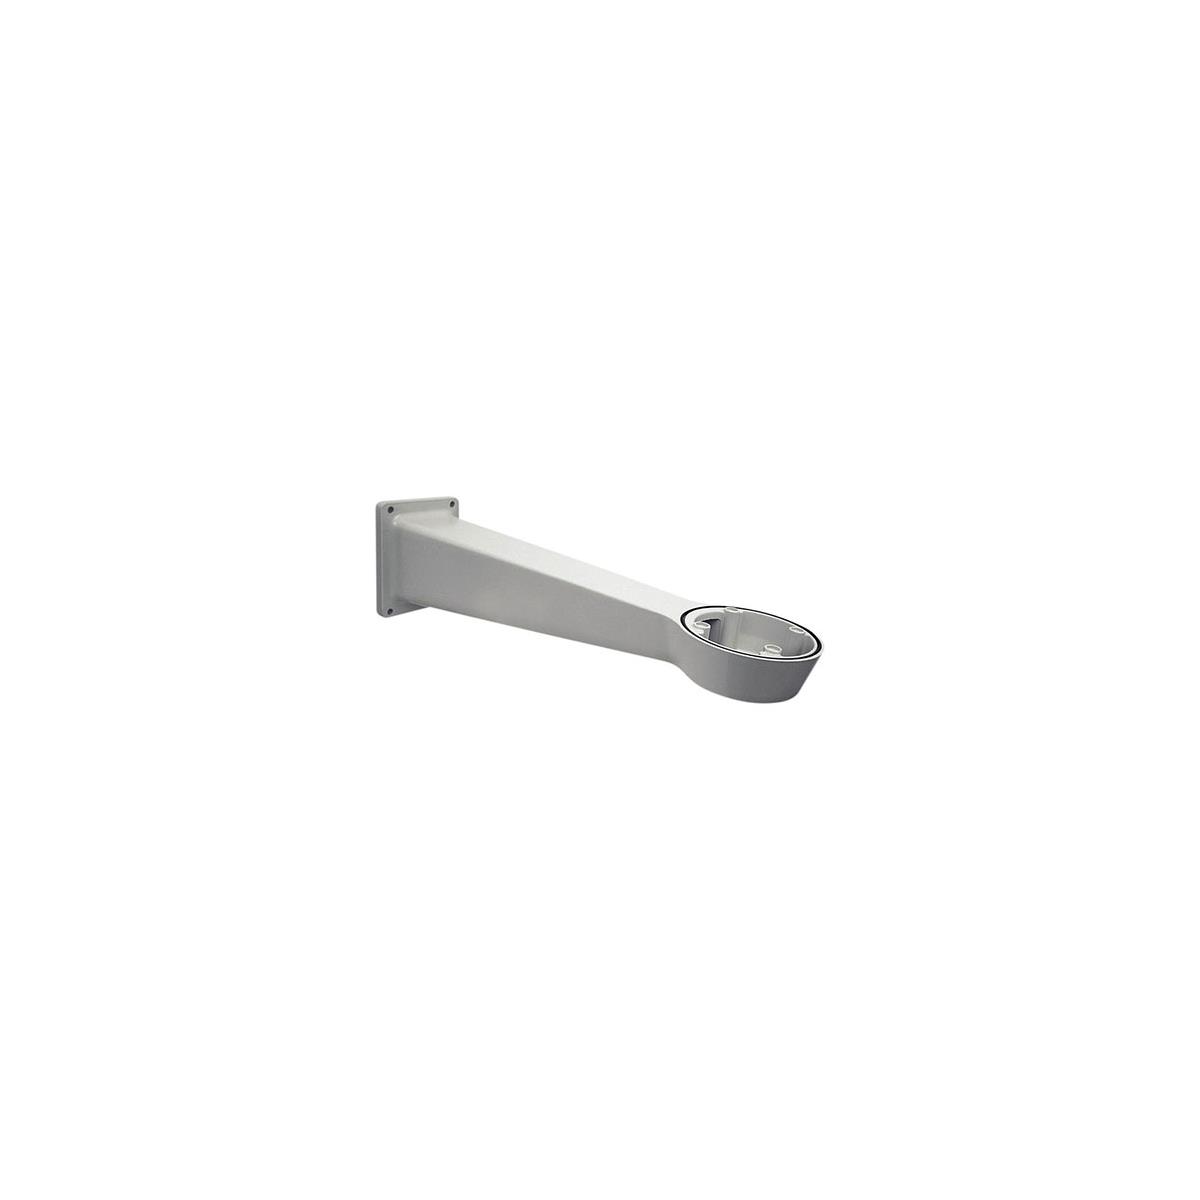 Image of Axis Communications Wall Bracket K for Q87-E Network Camera